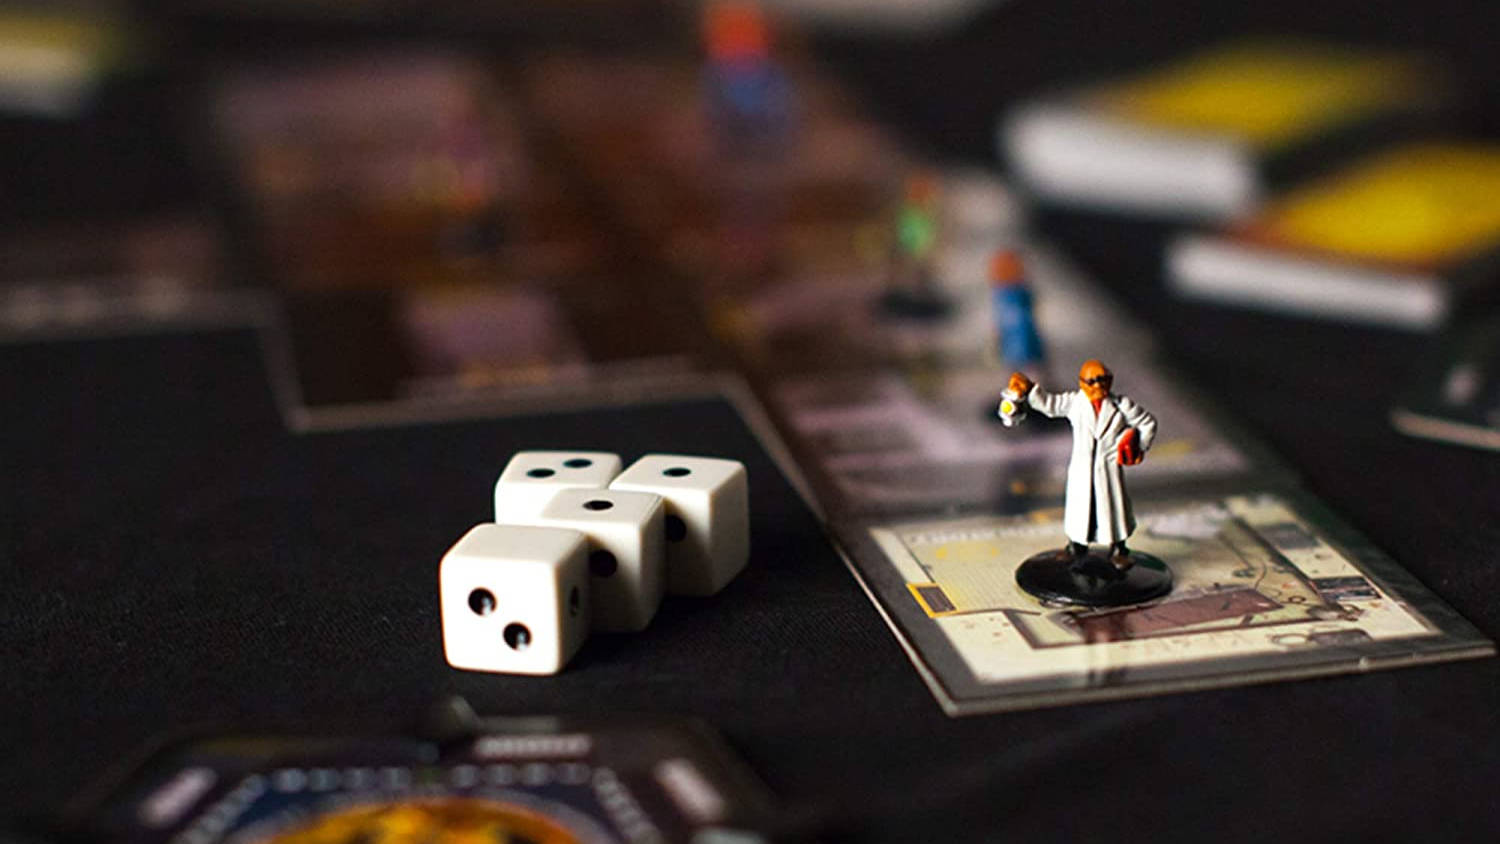 Fun board games Betrayal at House on the Hill miniature next to a collection of dice